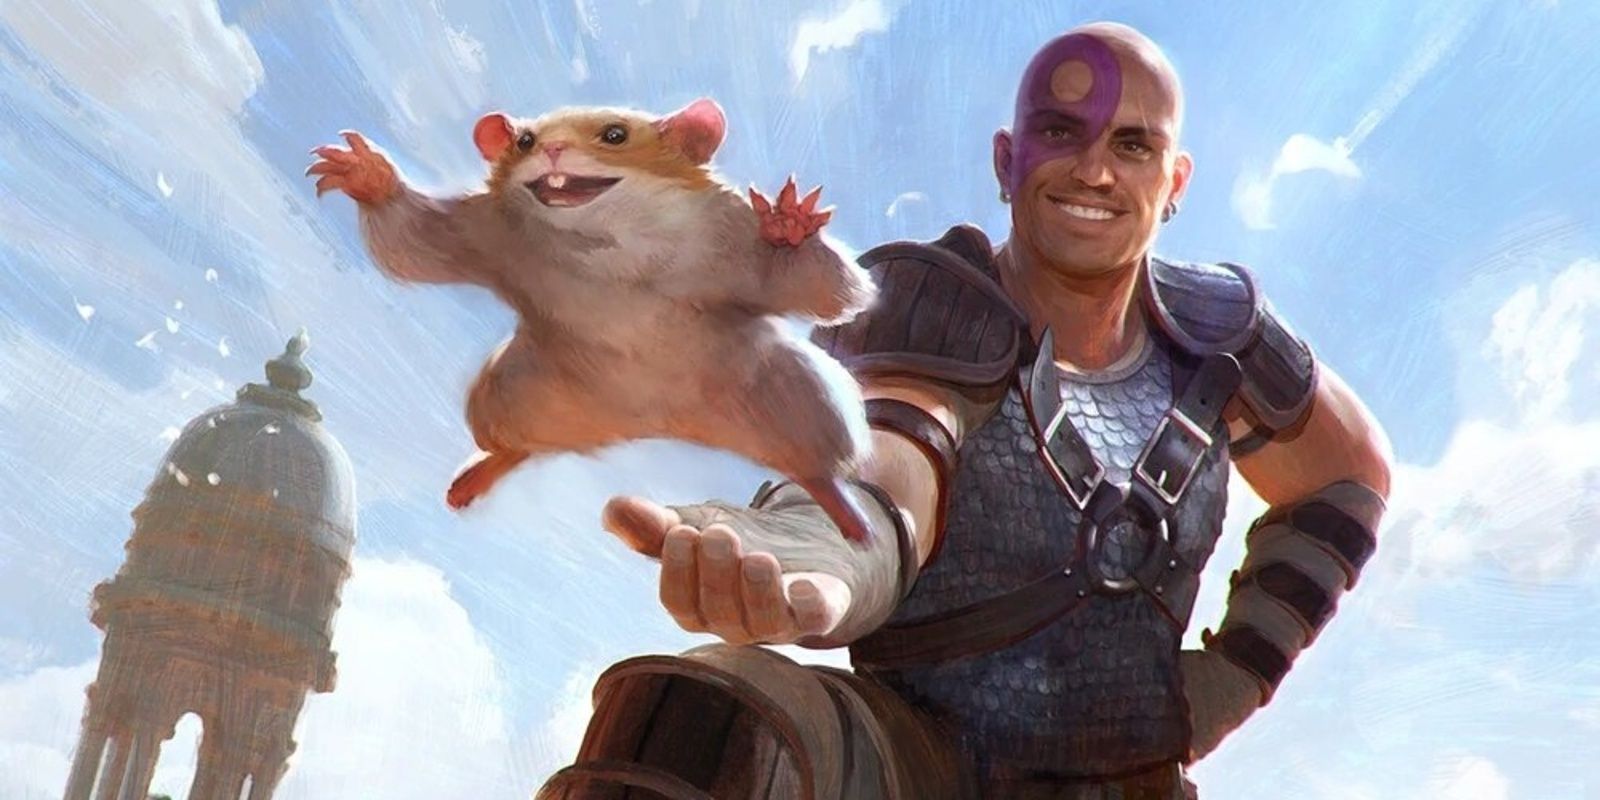 Minsc and Boo from Dungeons & Dragons. Woe, hamster be upon ye.